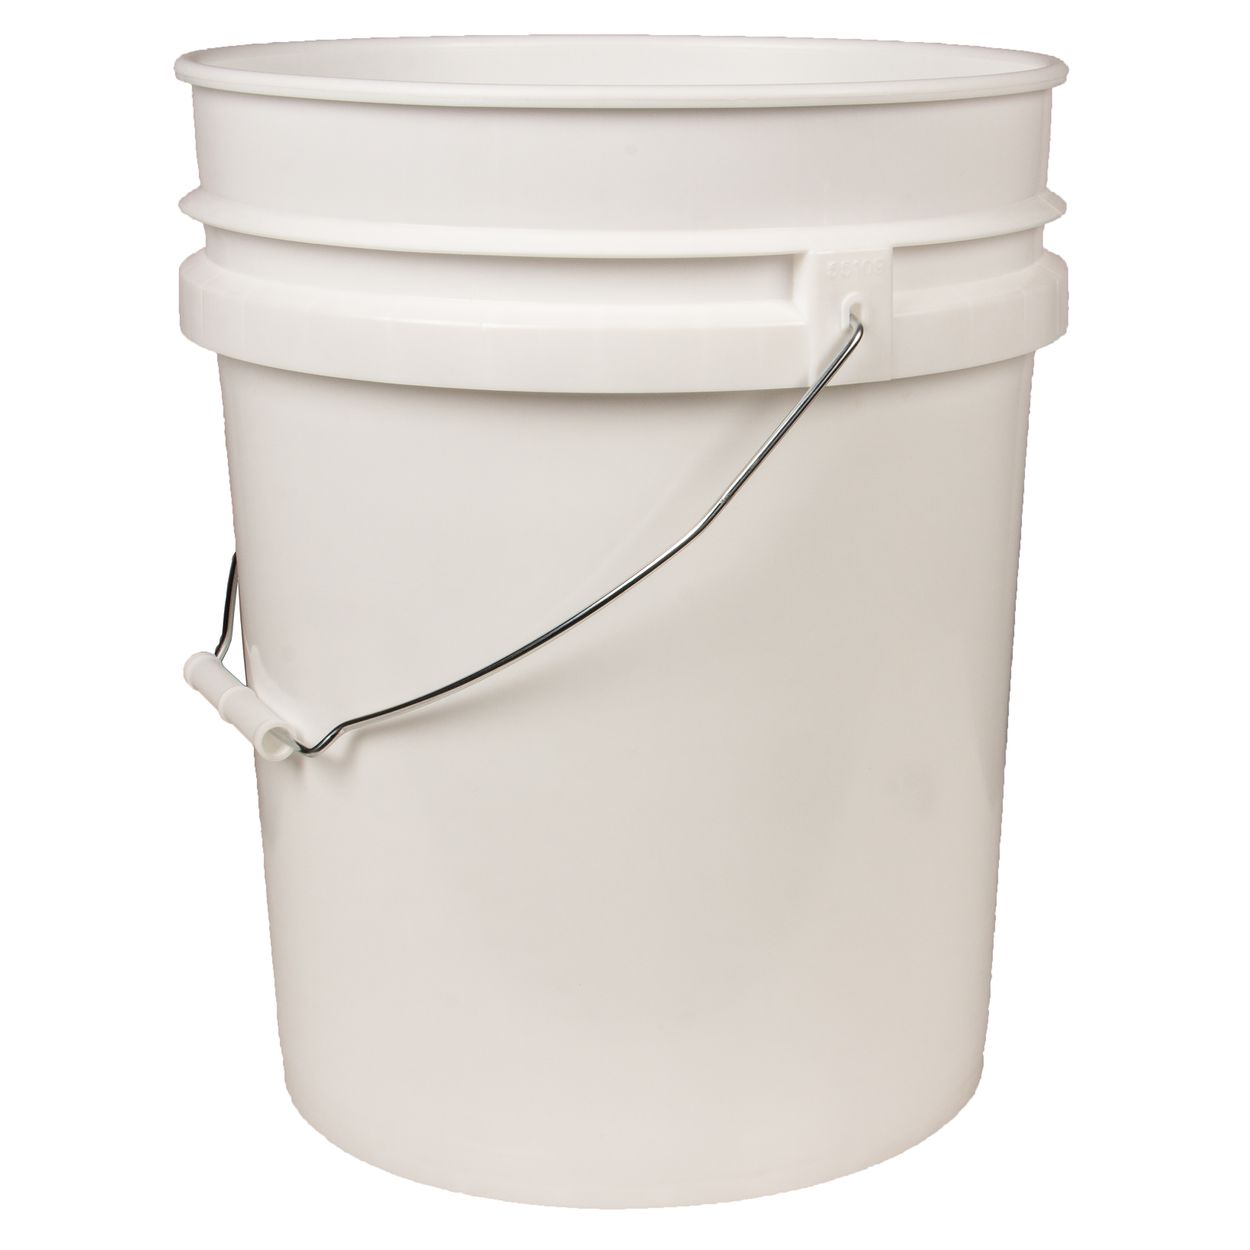 Plastic buckets and pails